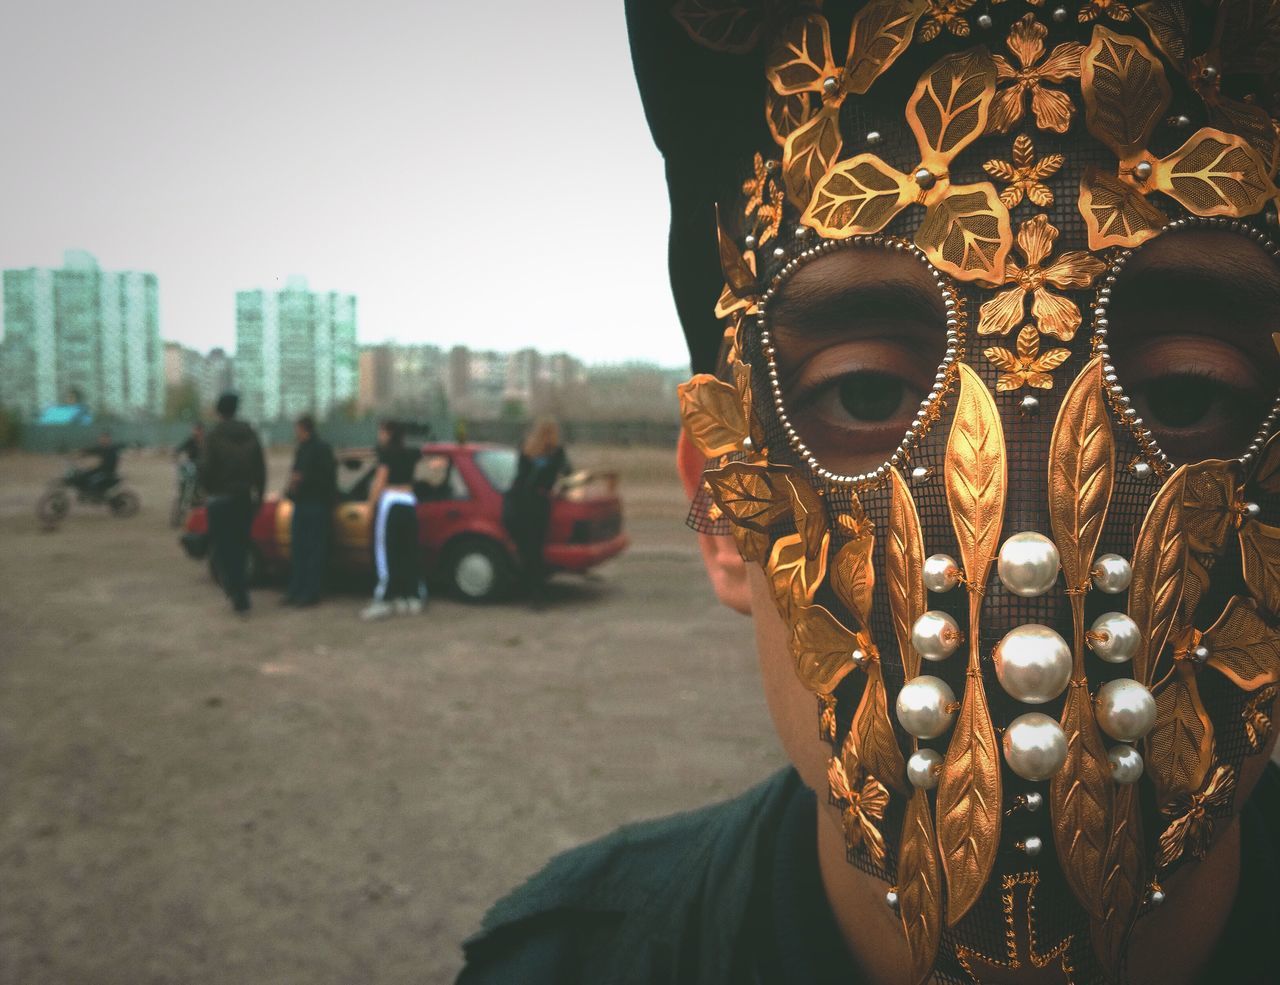 mask - disguise, real people, costume, venetian mask, disguise, carnival, men, lifestyles, day, outdoors, one person, close-up, people